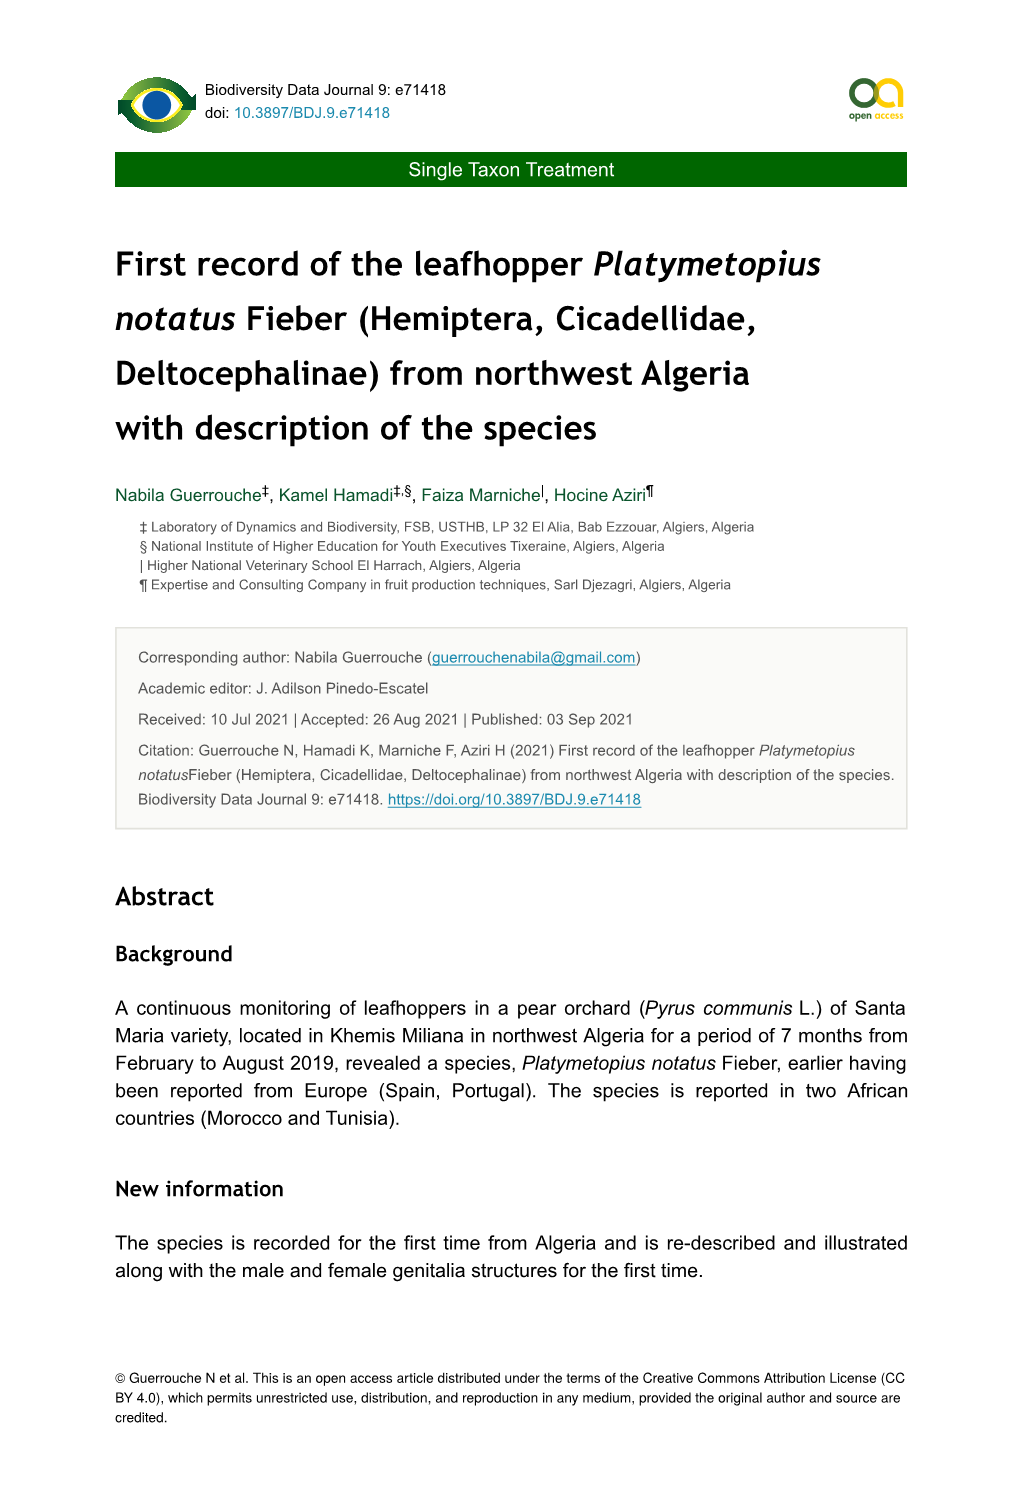 First Record of the Leafhopper Platymetopius Notatus Fieber (Hemiptera, Cicadellidae, Deltocephalinae) from Northwest Algeria with Description of the Species